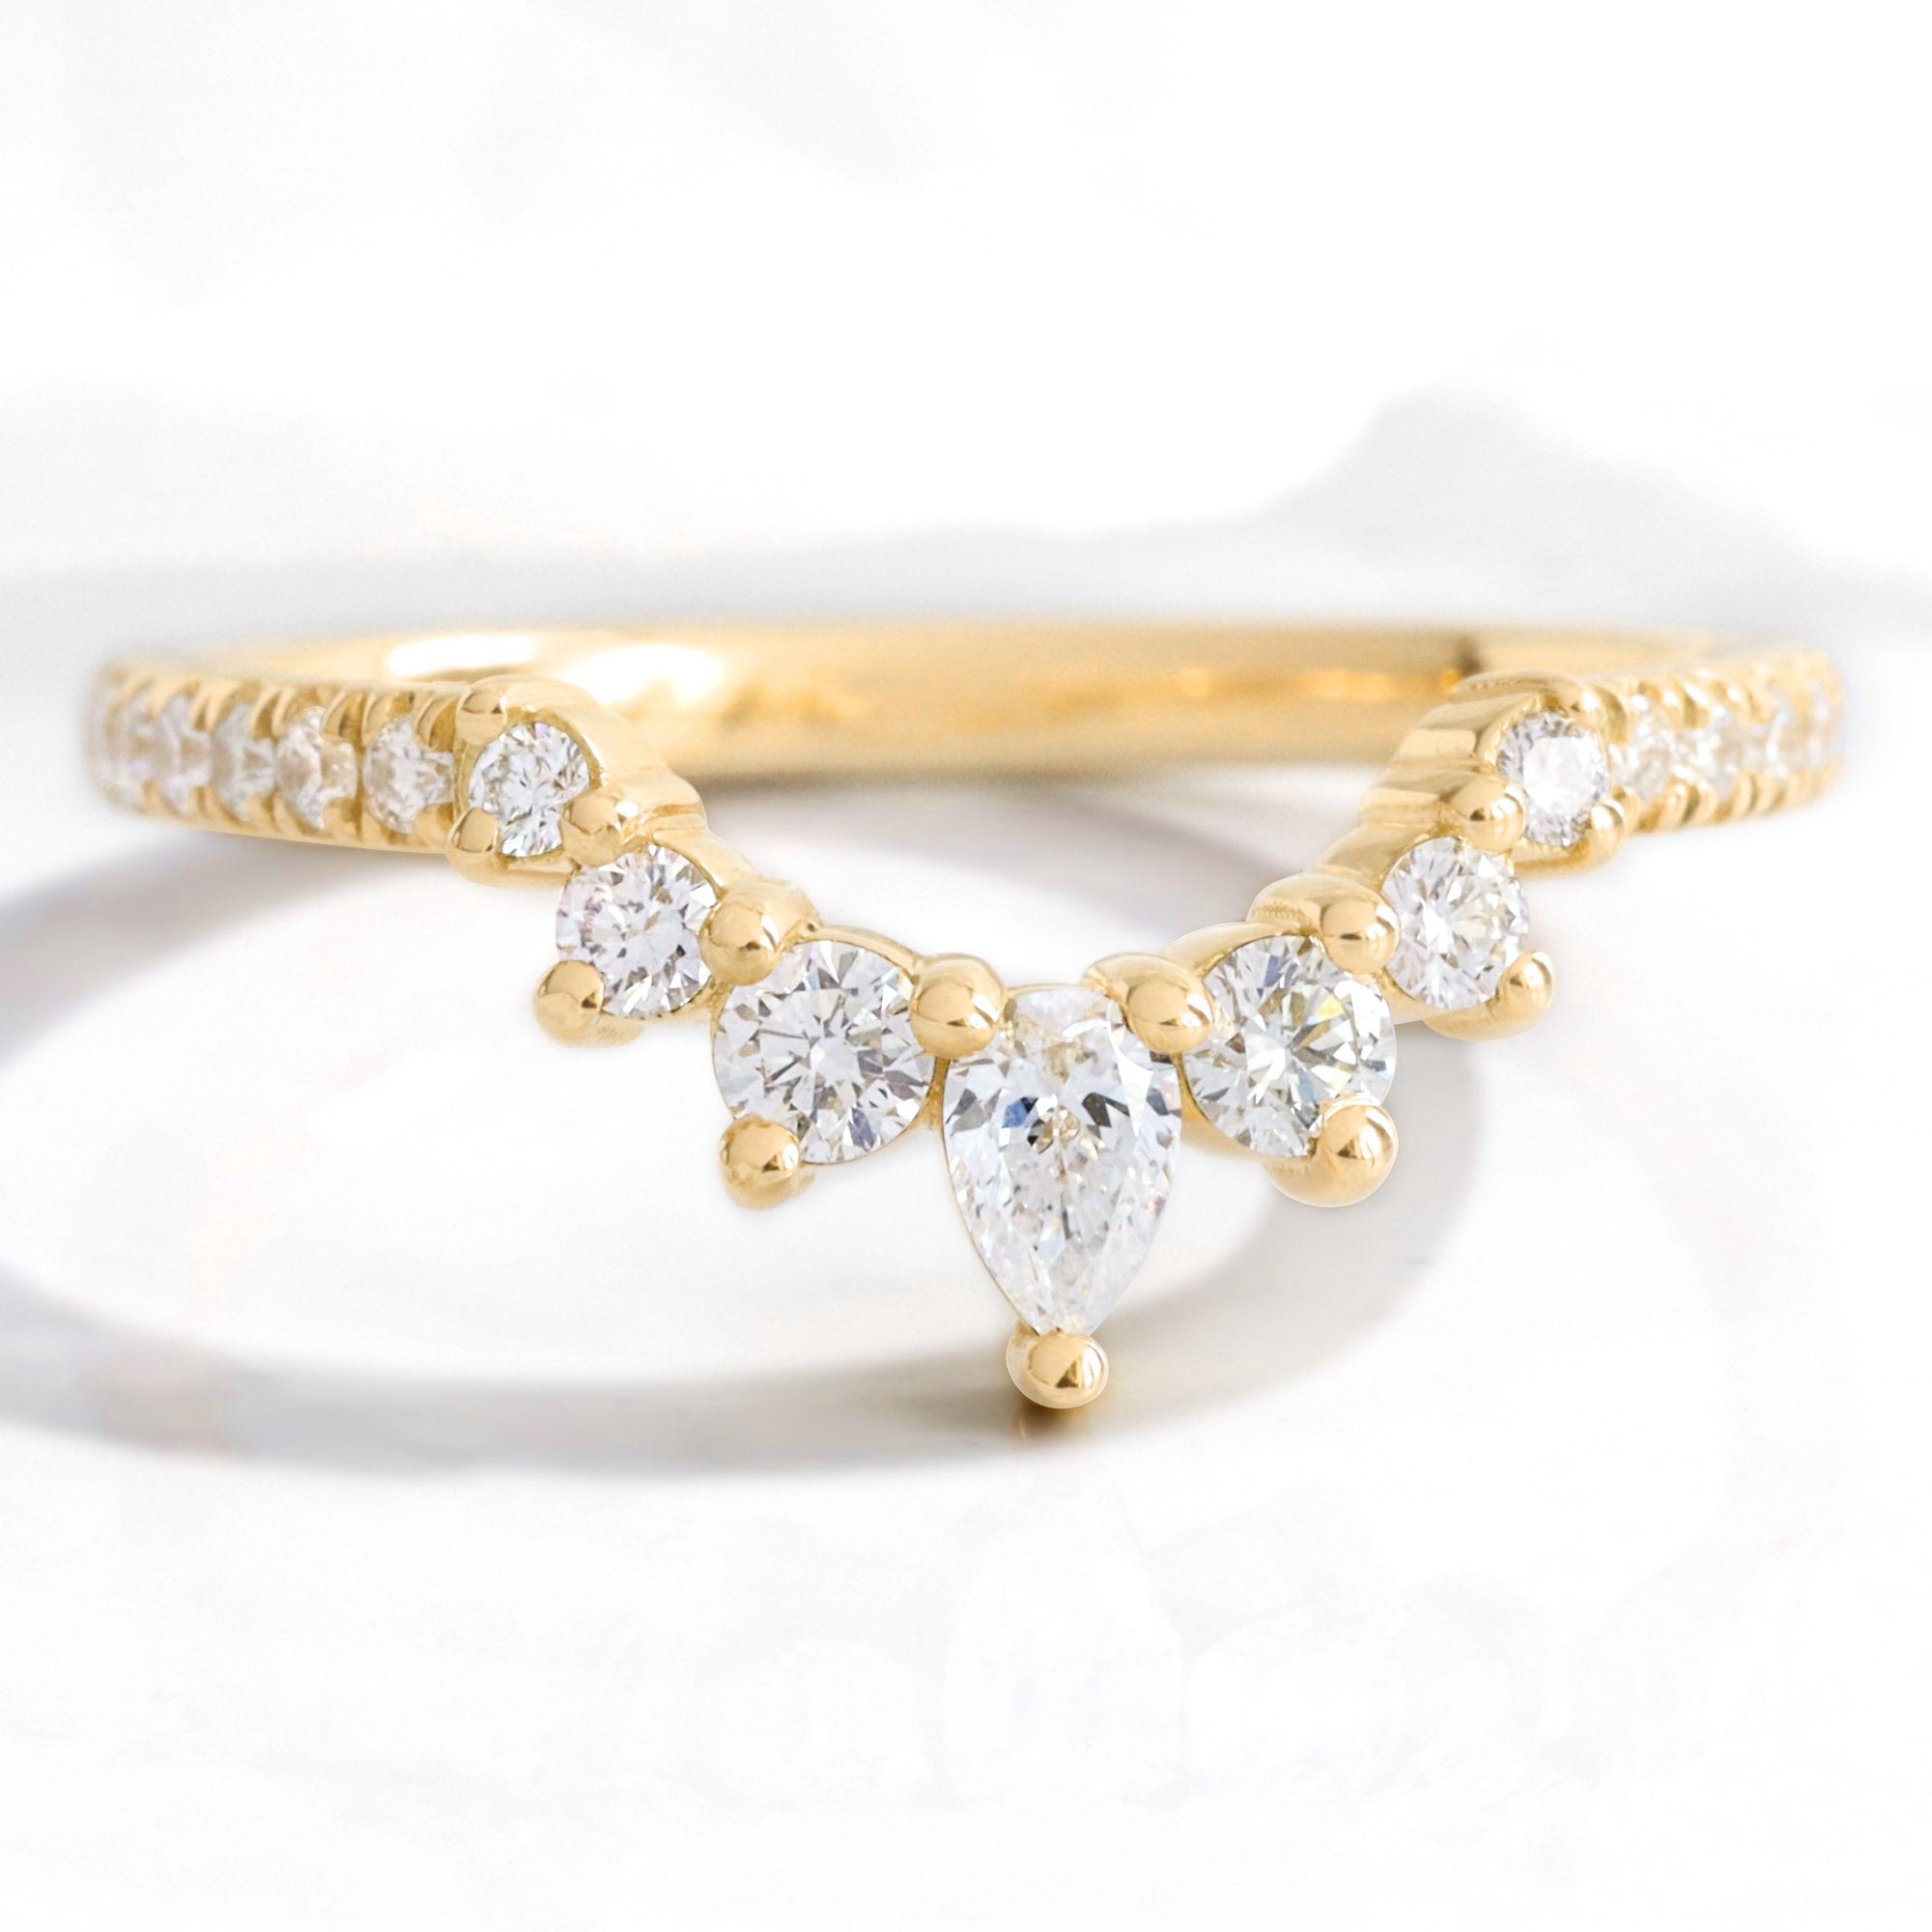 Pear and round diamond wedding ring yellow gold u shaped curved pave wedding band la more design jewelry